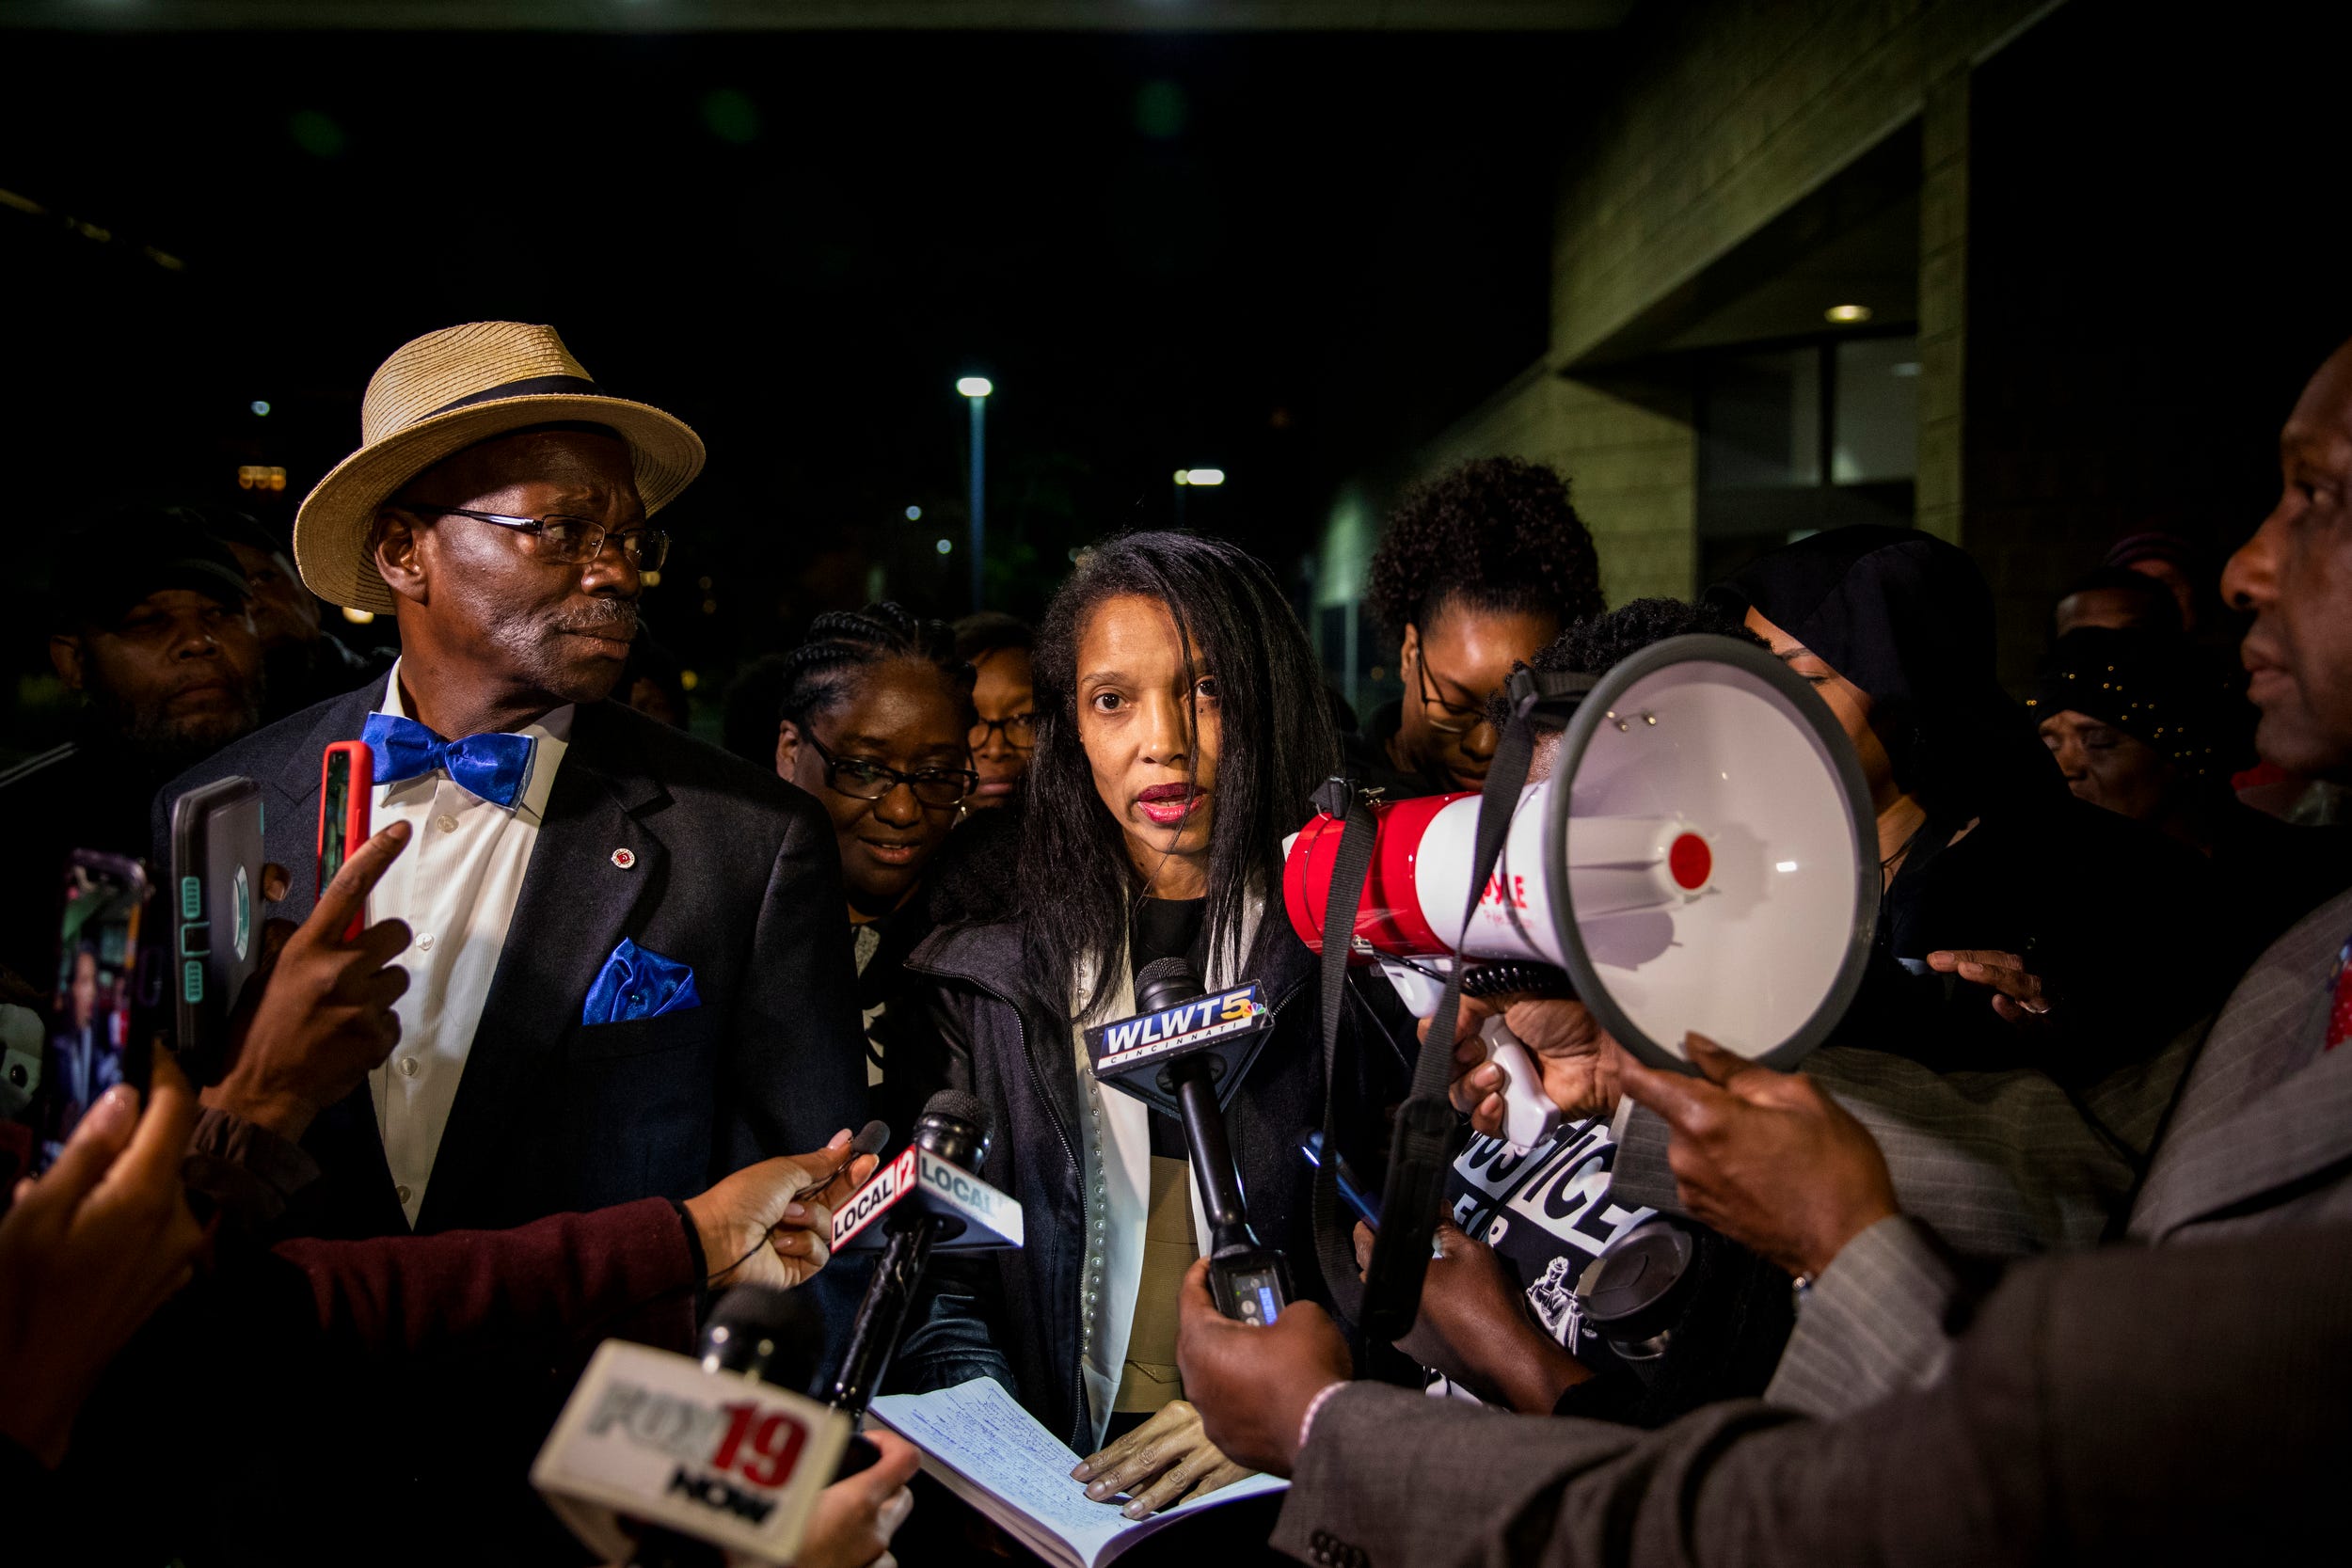 Former juvenile court judge Tracie Hunter speaks to local media and her supporters after her release from the Hamilton County Justice Center in October 2019.